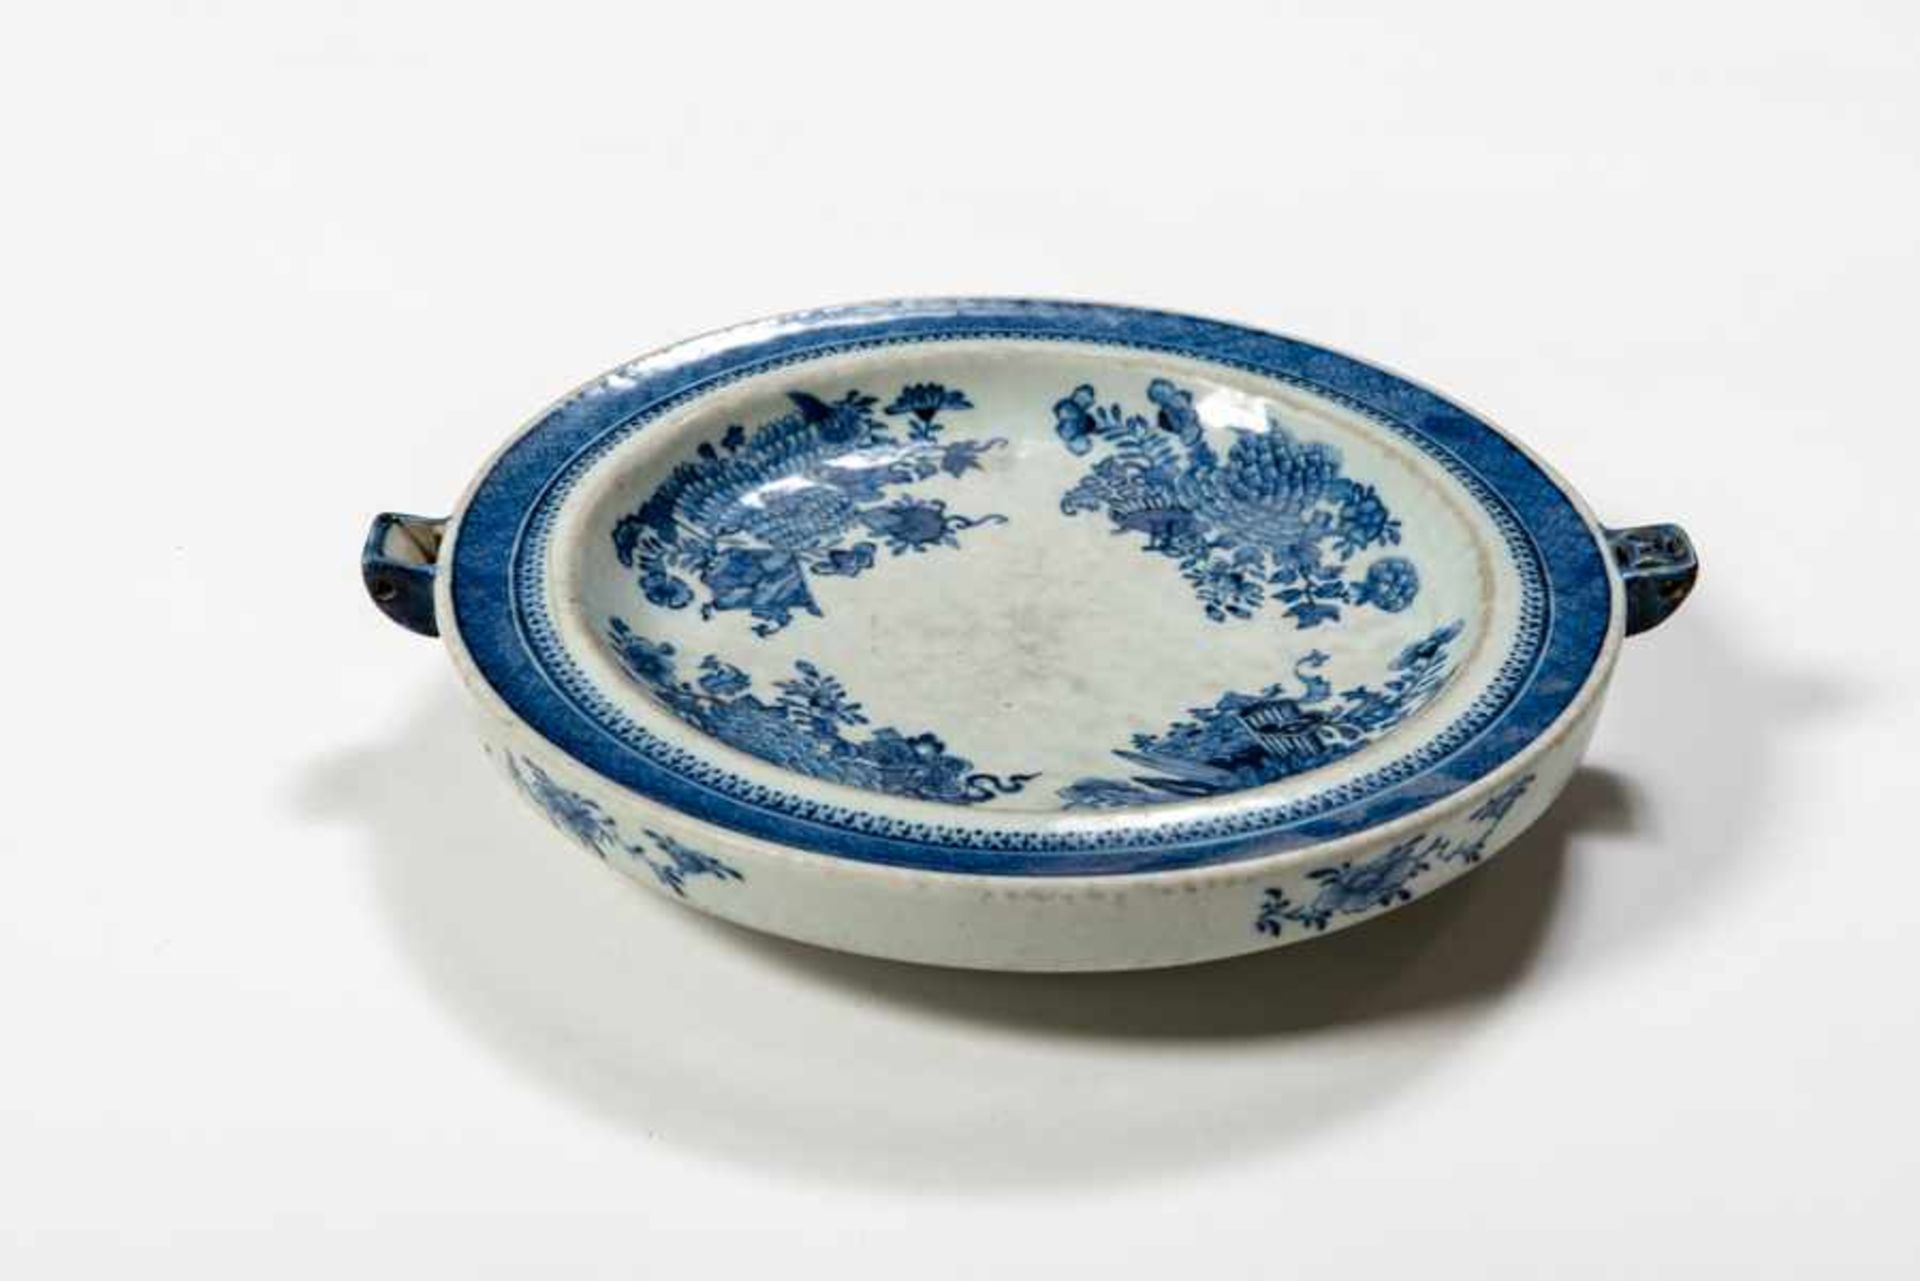 INSULATING BOWL Blue and whiteporcelain. China, Qing dynasty 19th cent. 保溫盆A very rare insulating